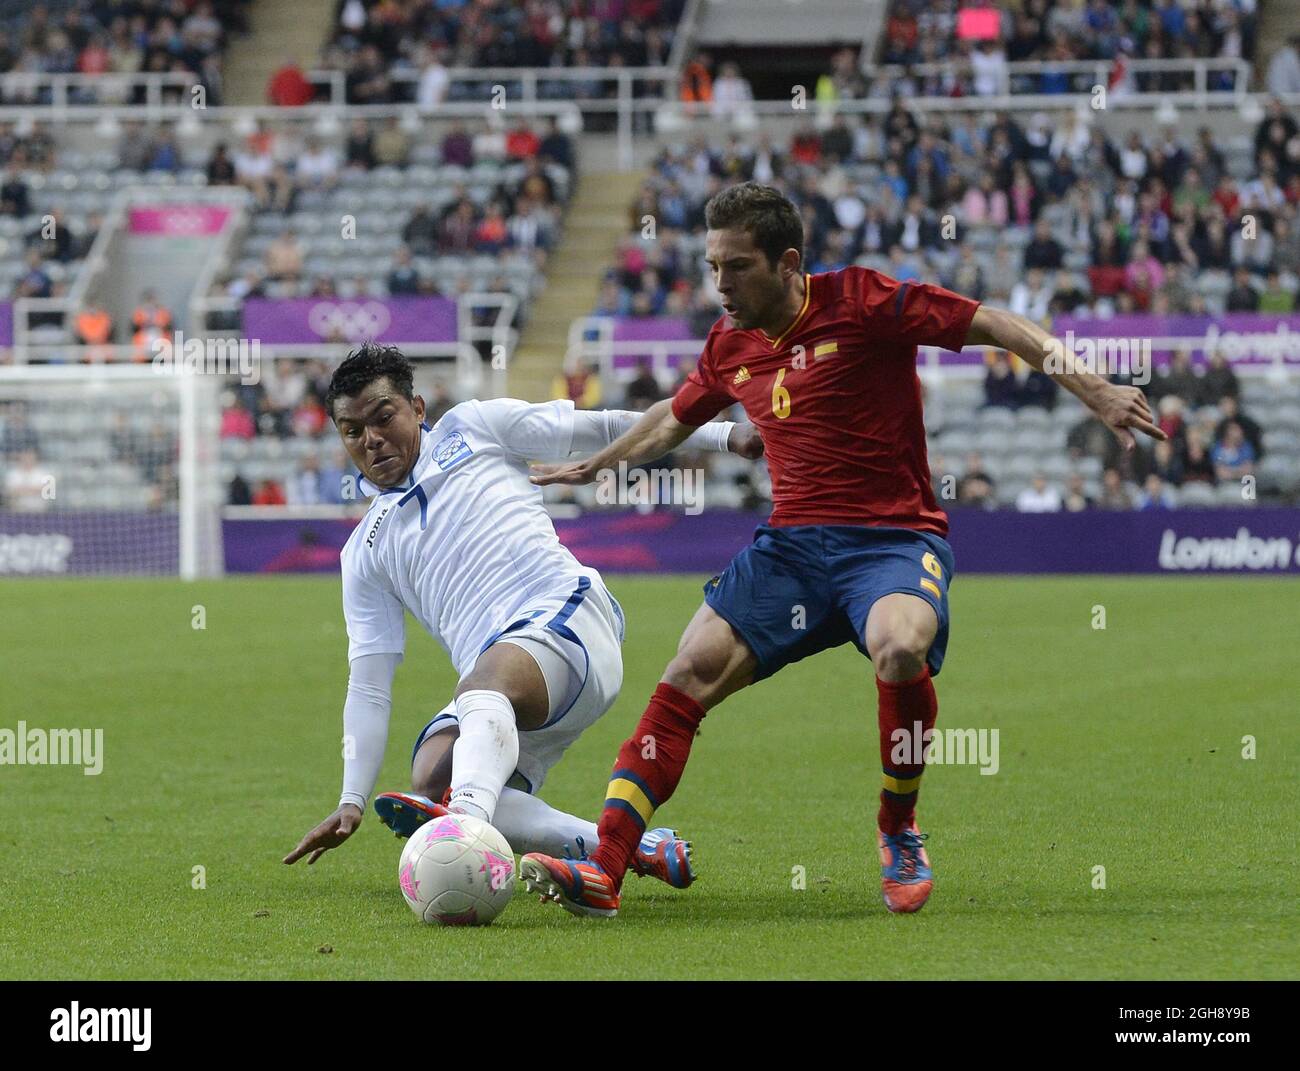 Honduras' Mario Martinez (L) Spain's Jordi Alba during the London Olympic 2012 first round Group D men's match between Spain v Honduras at the St. James' Park, Newcastle upon Tyne on the 29th July 2012. Stock Photo